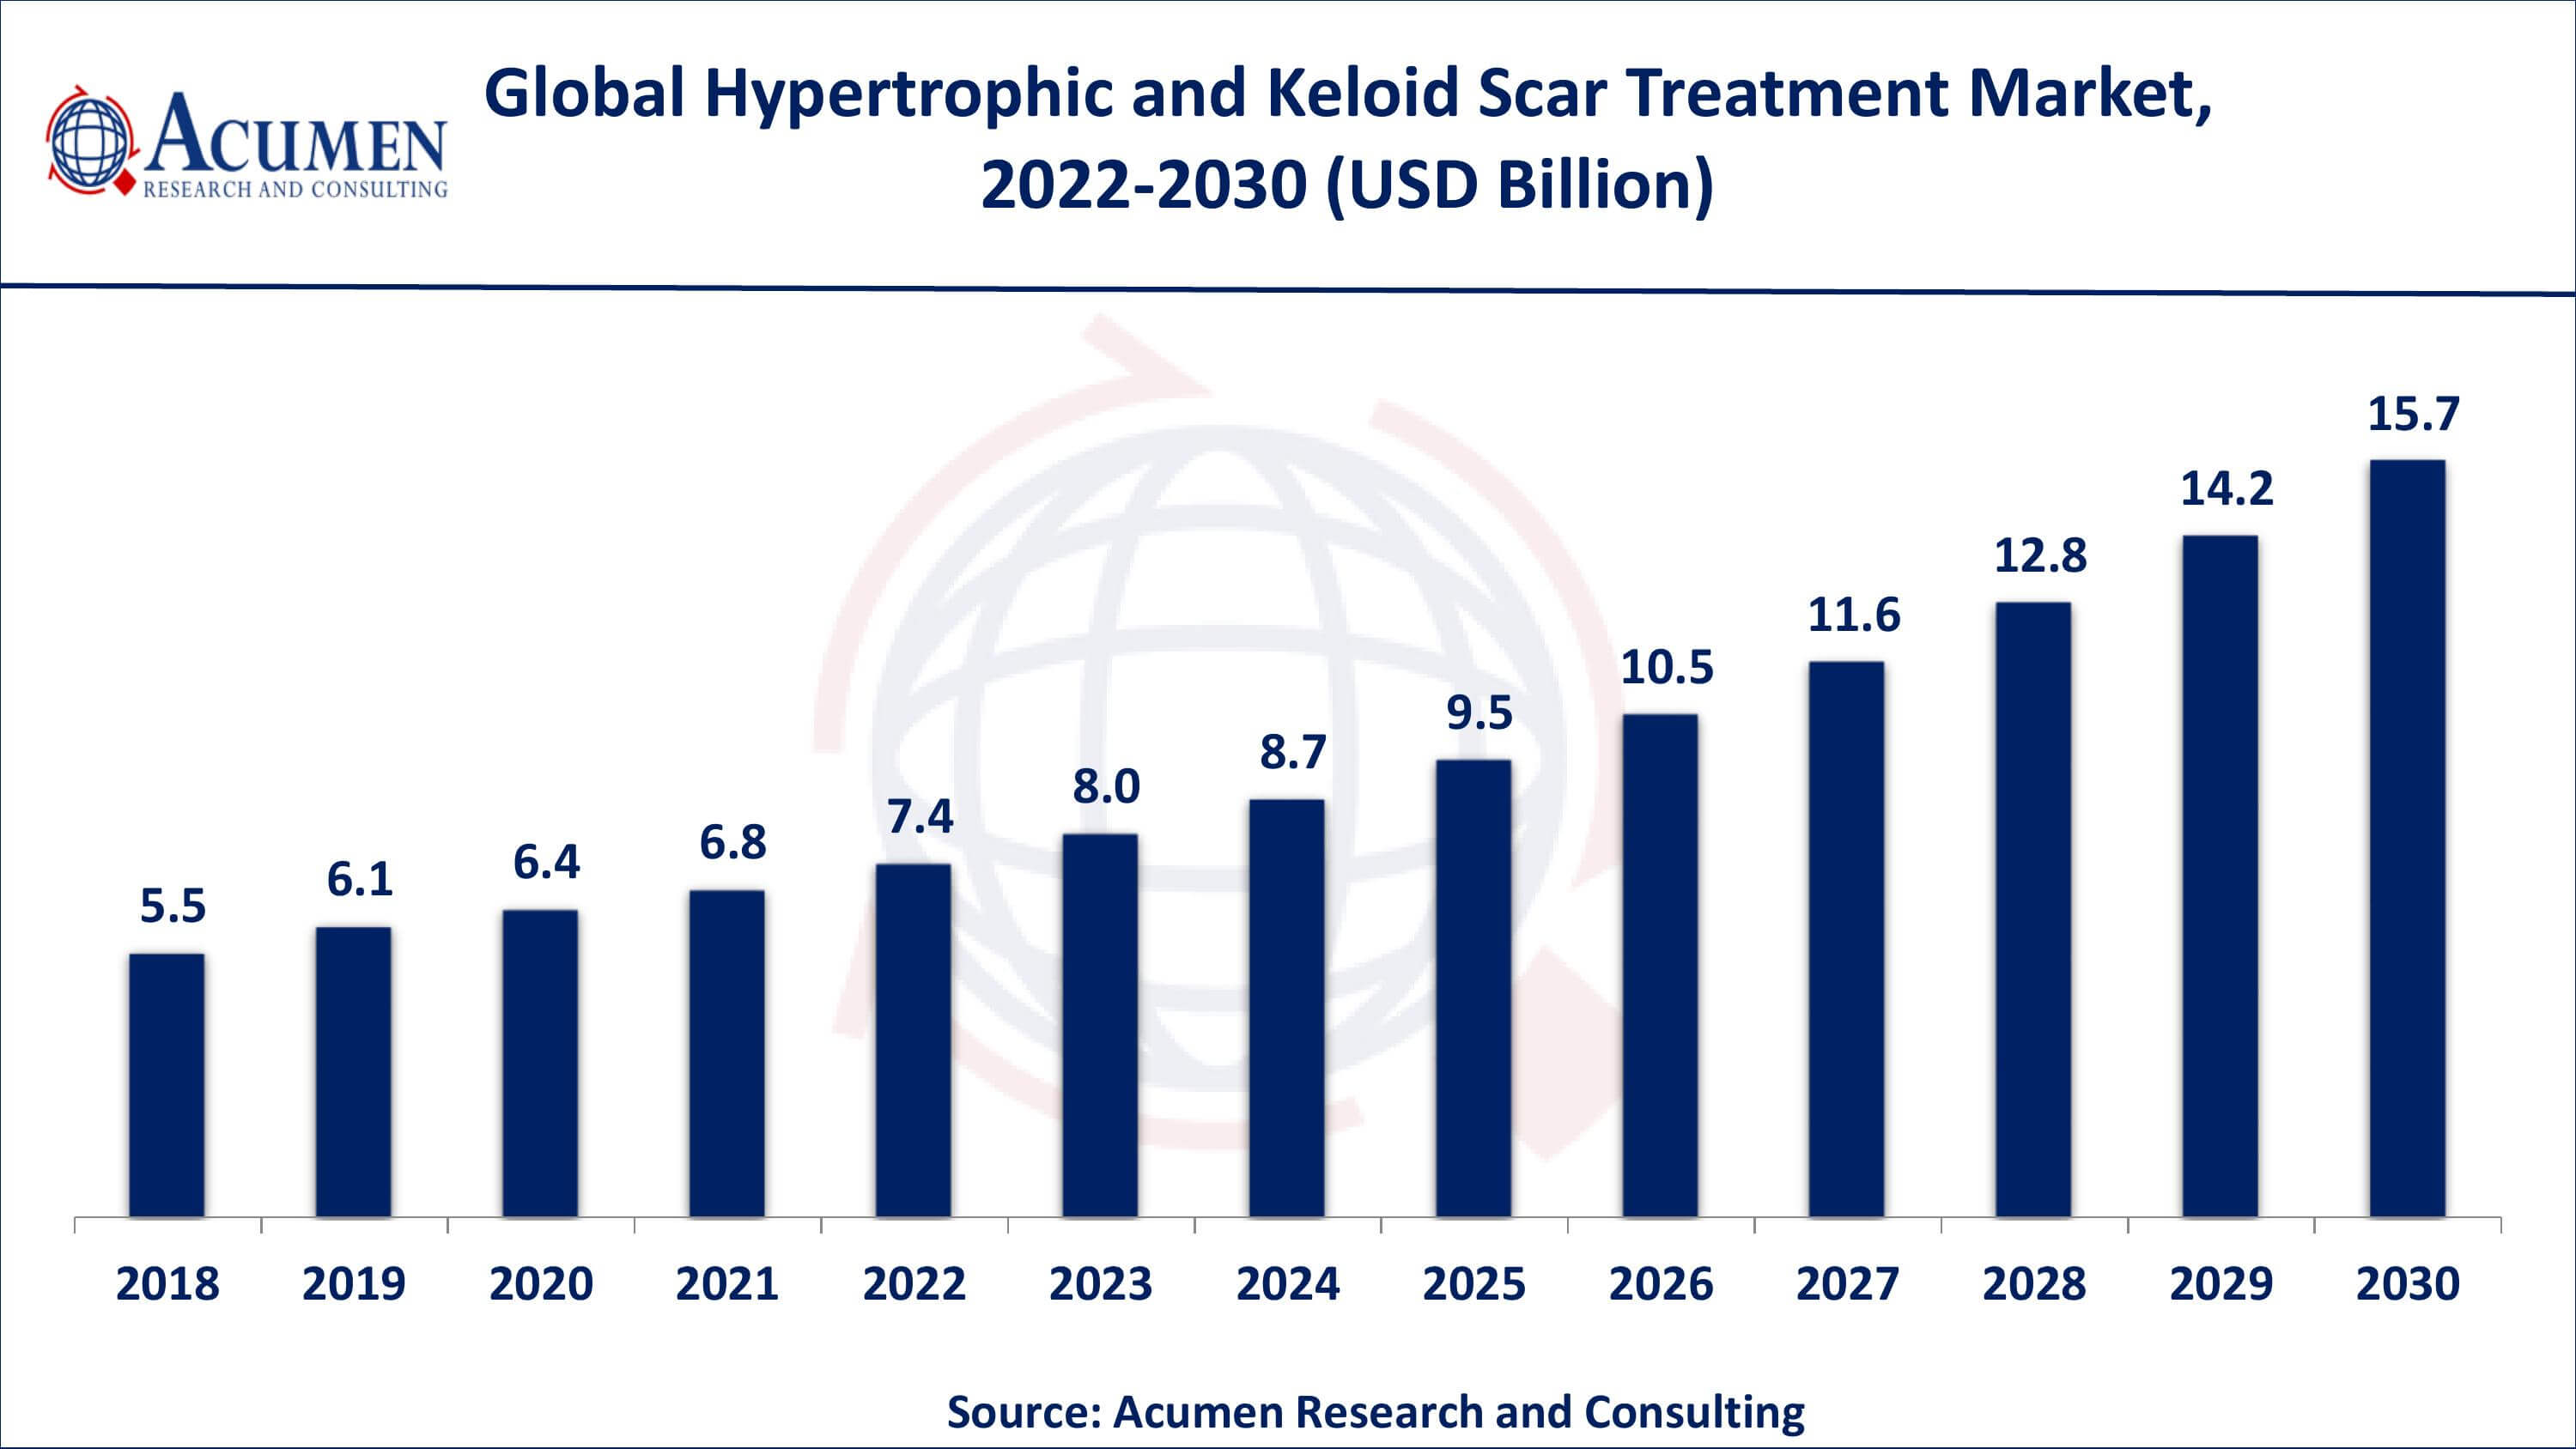 Asia-Pacific hypertrophic and keloid scar treatment market growth will register swift CAGR from 2022 to 2030